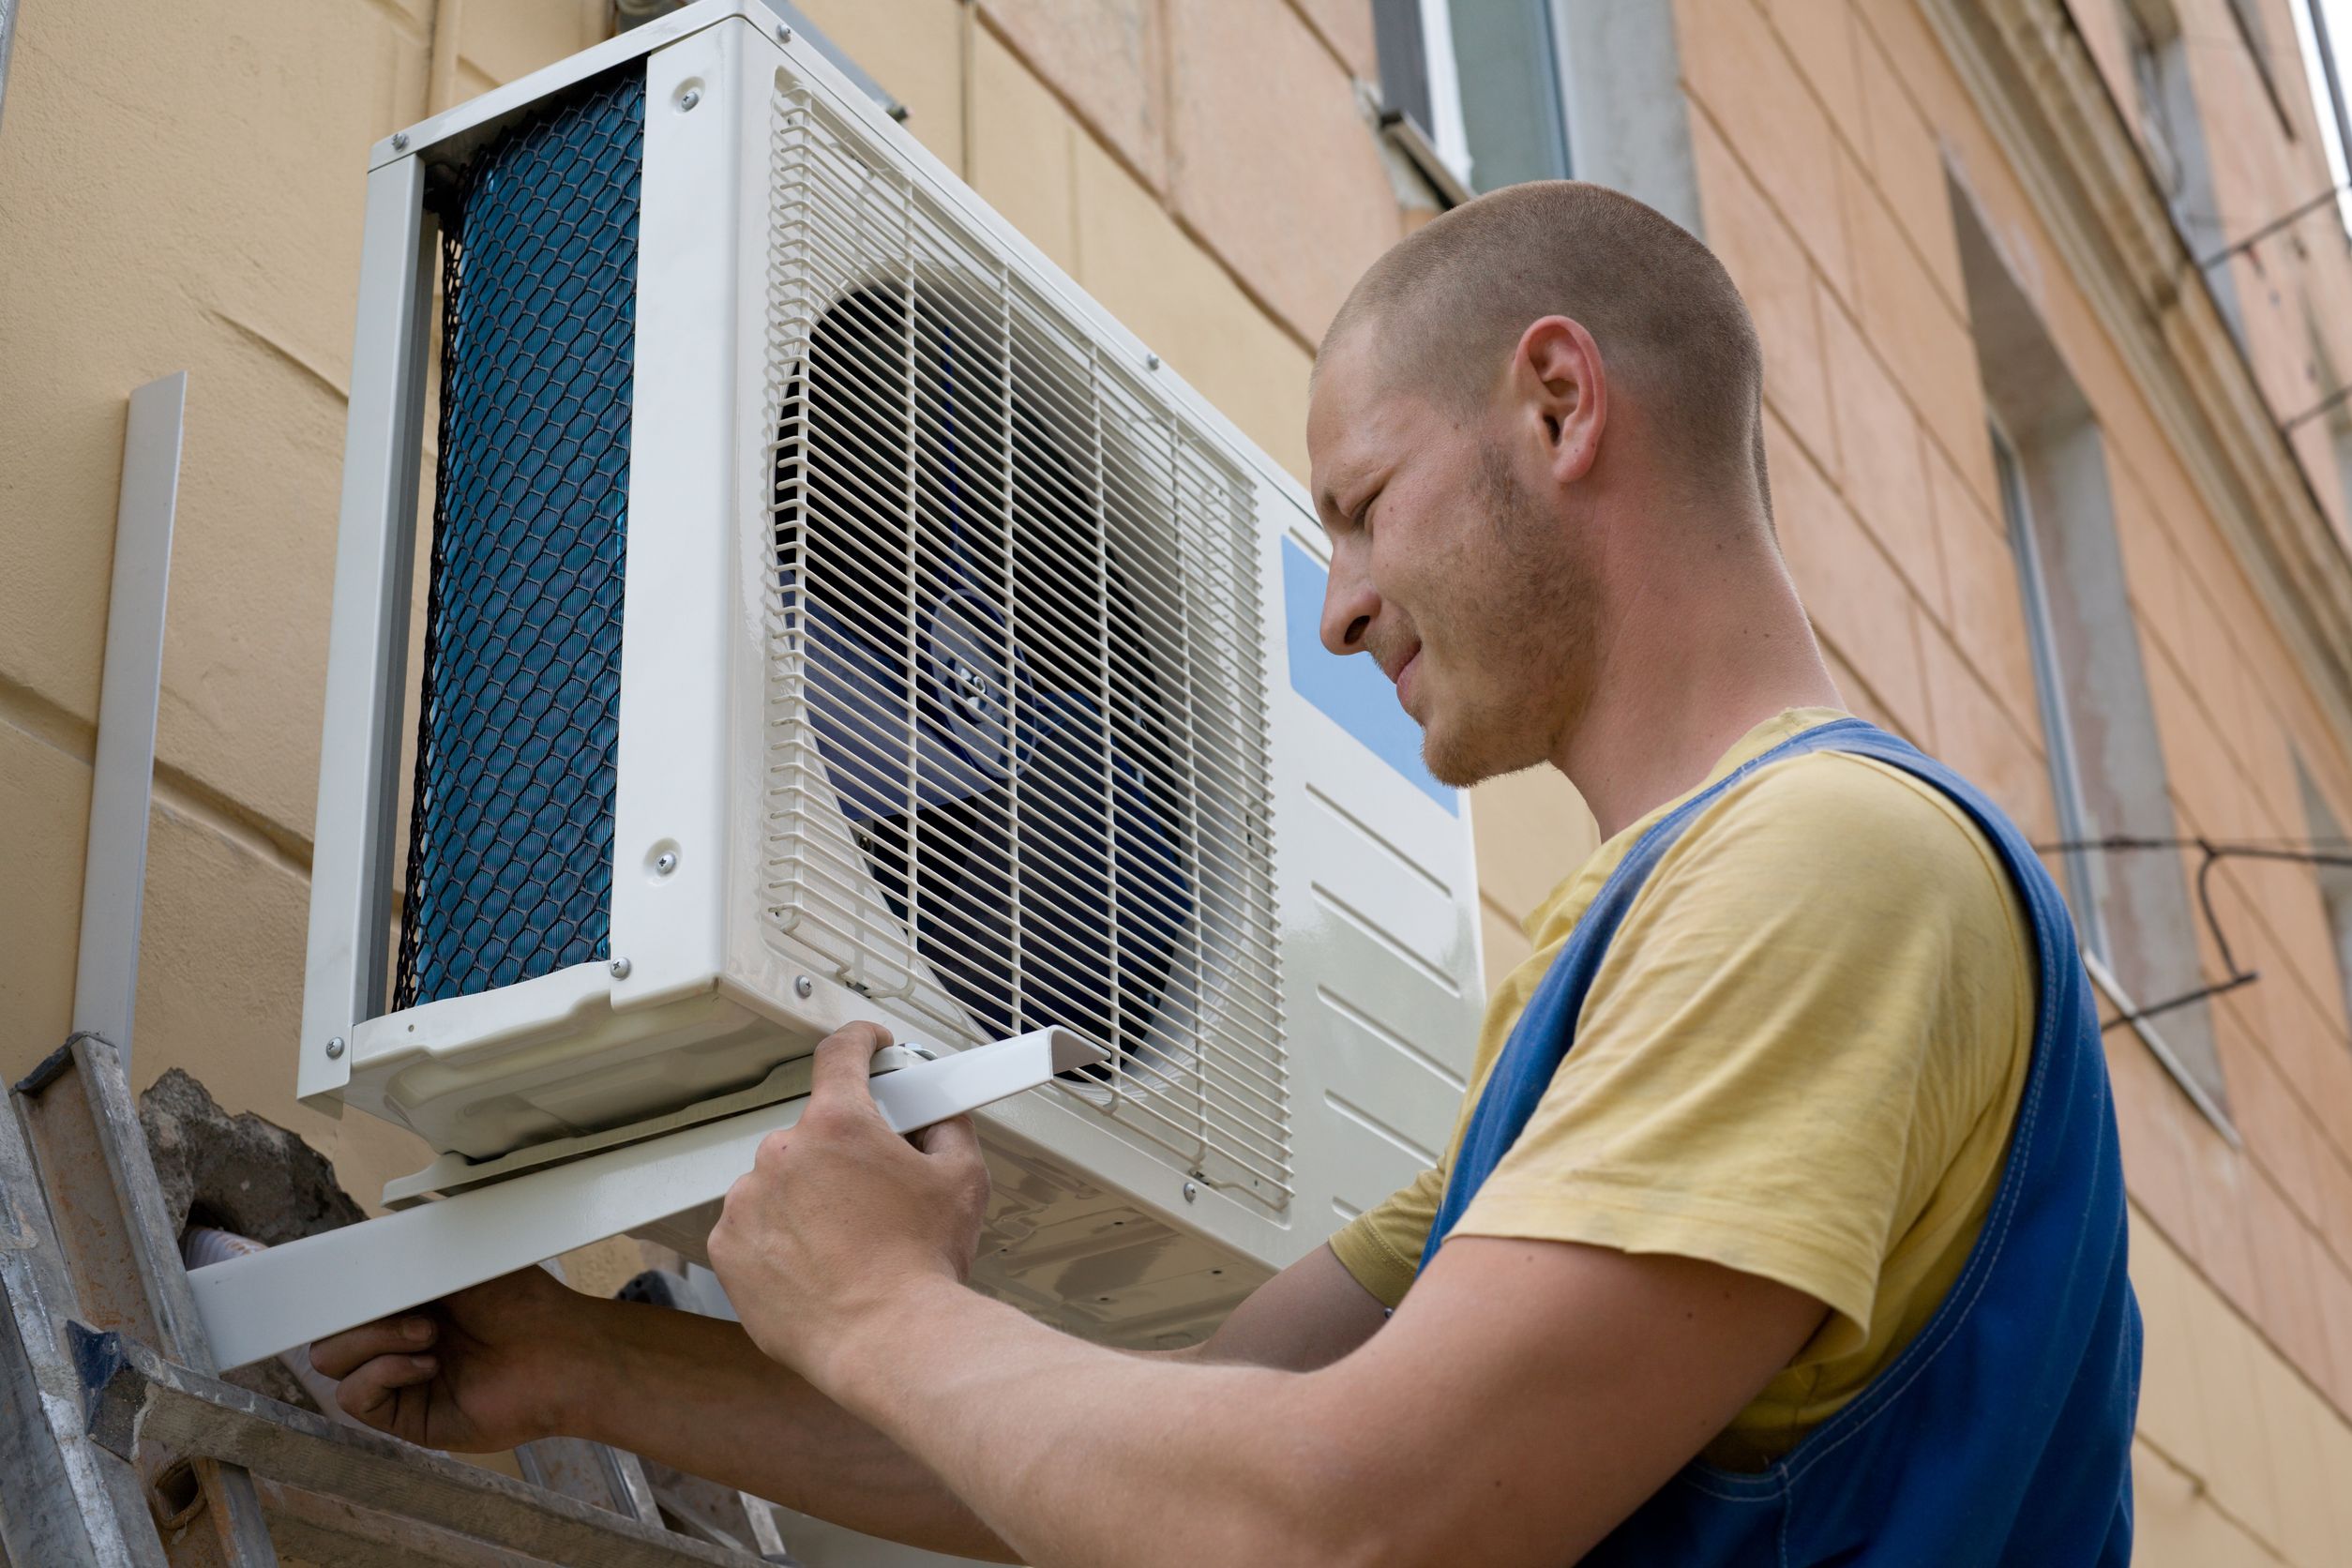 Finding A Good Deal On Air Conditioner in Spanish Fork UT